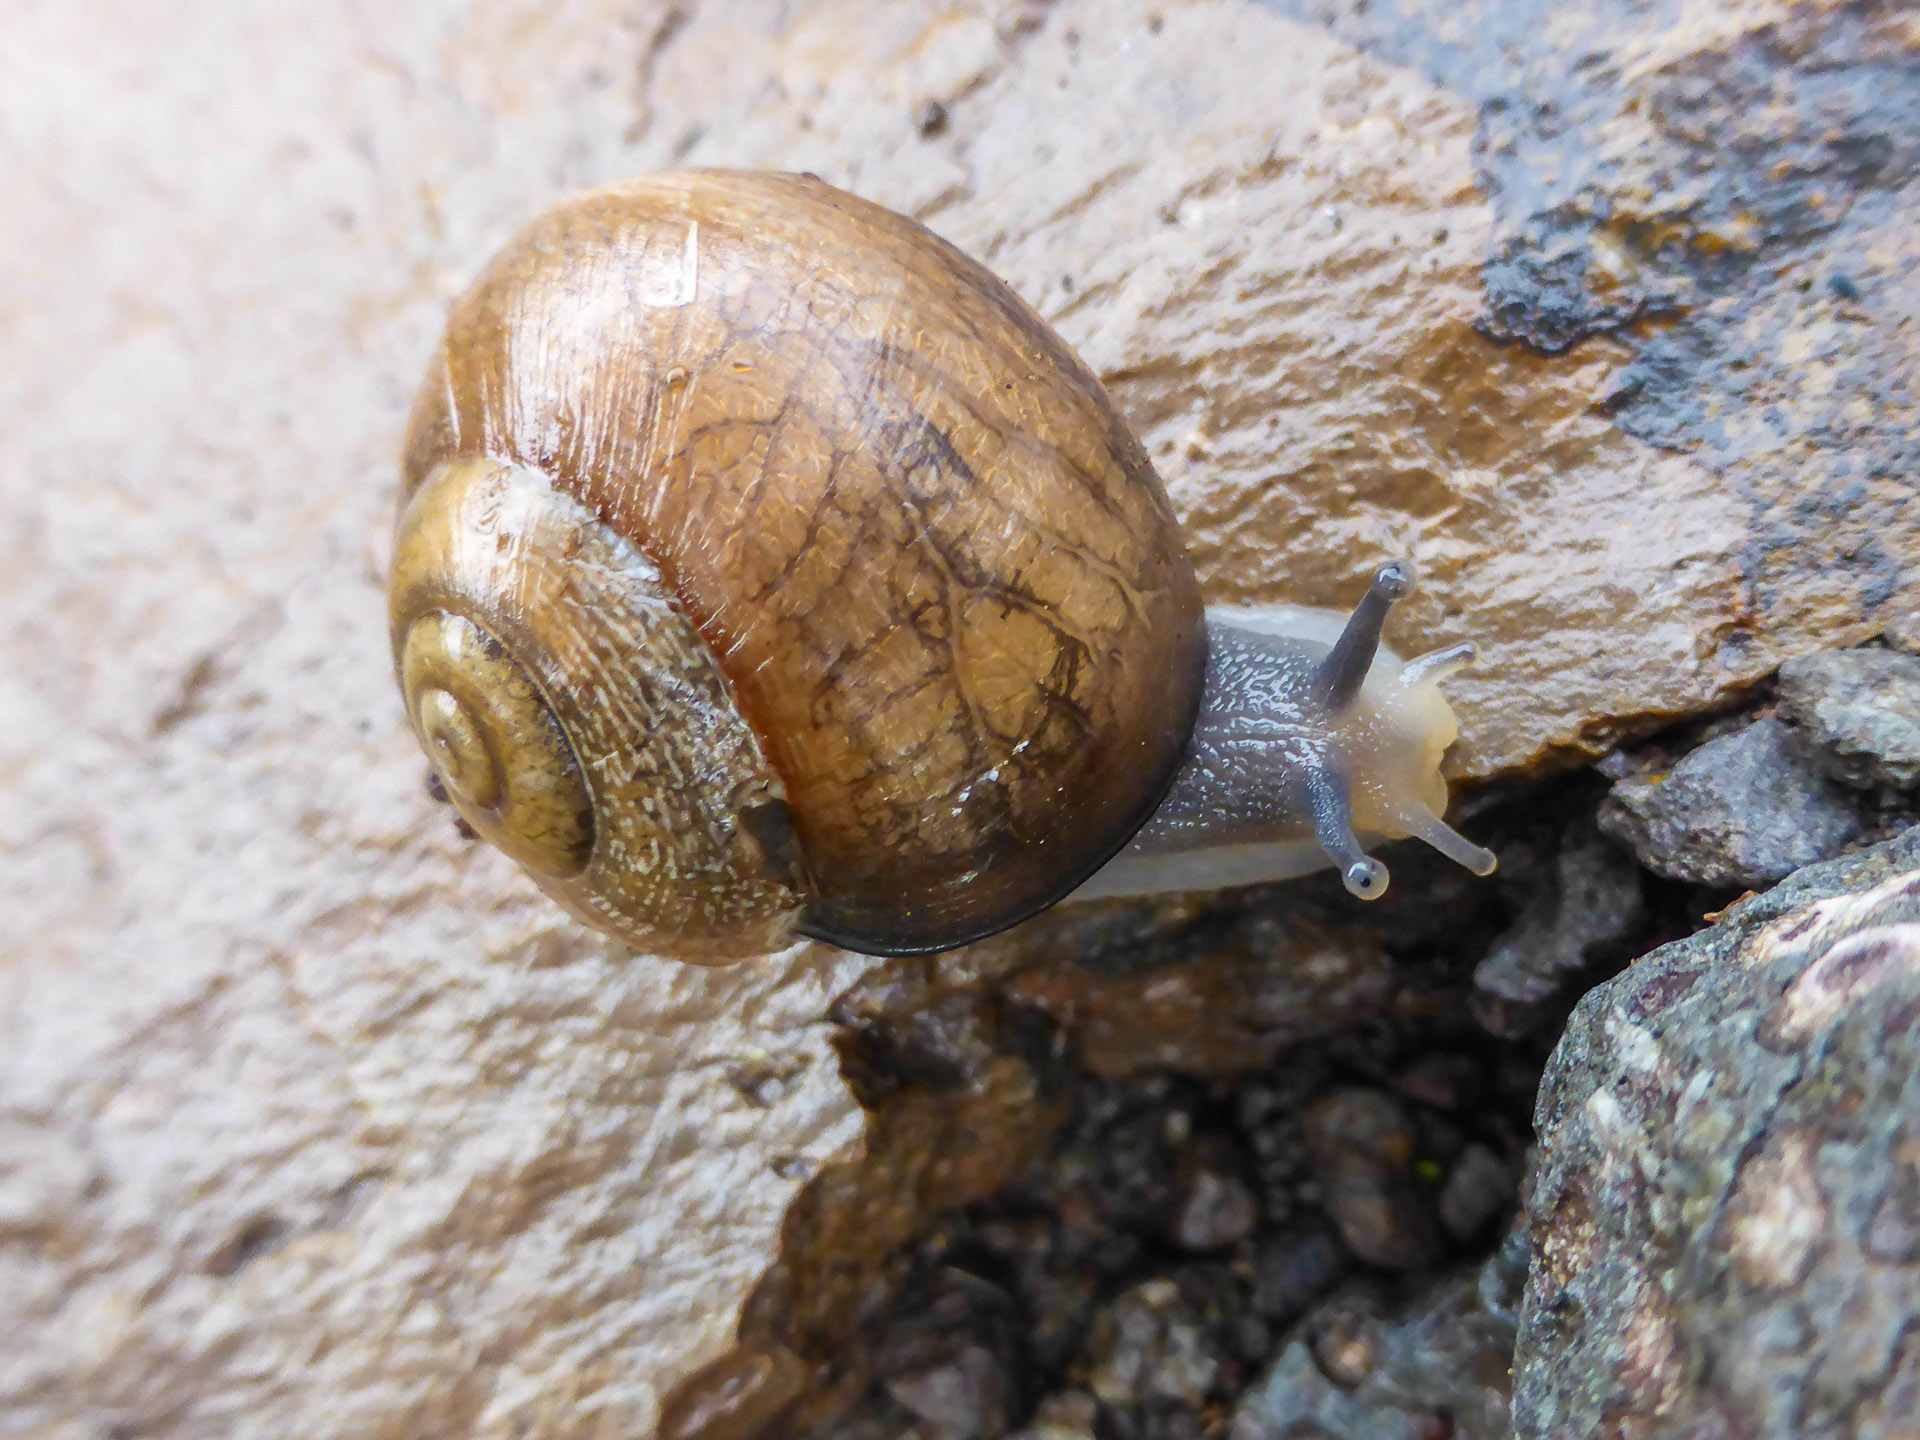 a snail on a stone background crawling away from the camera